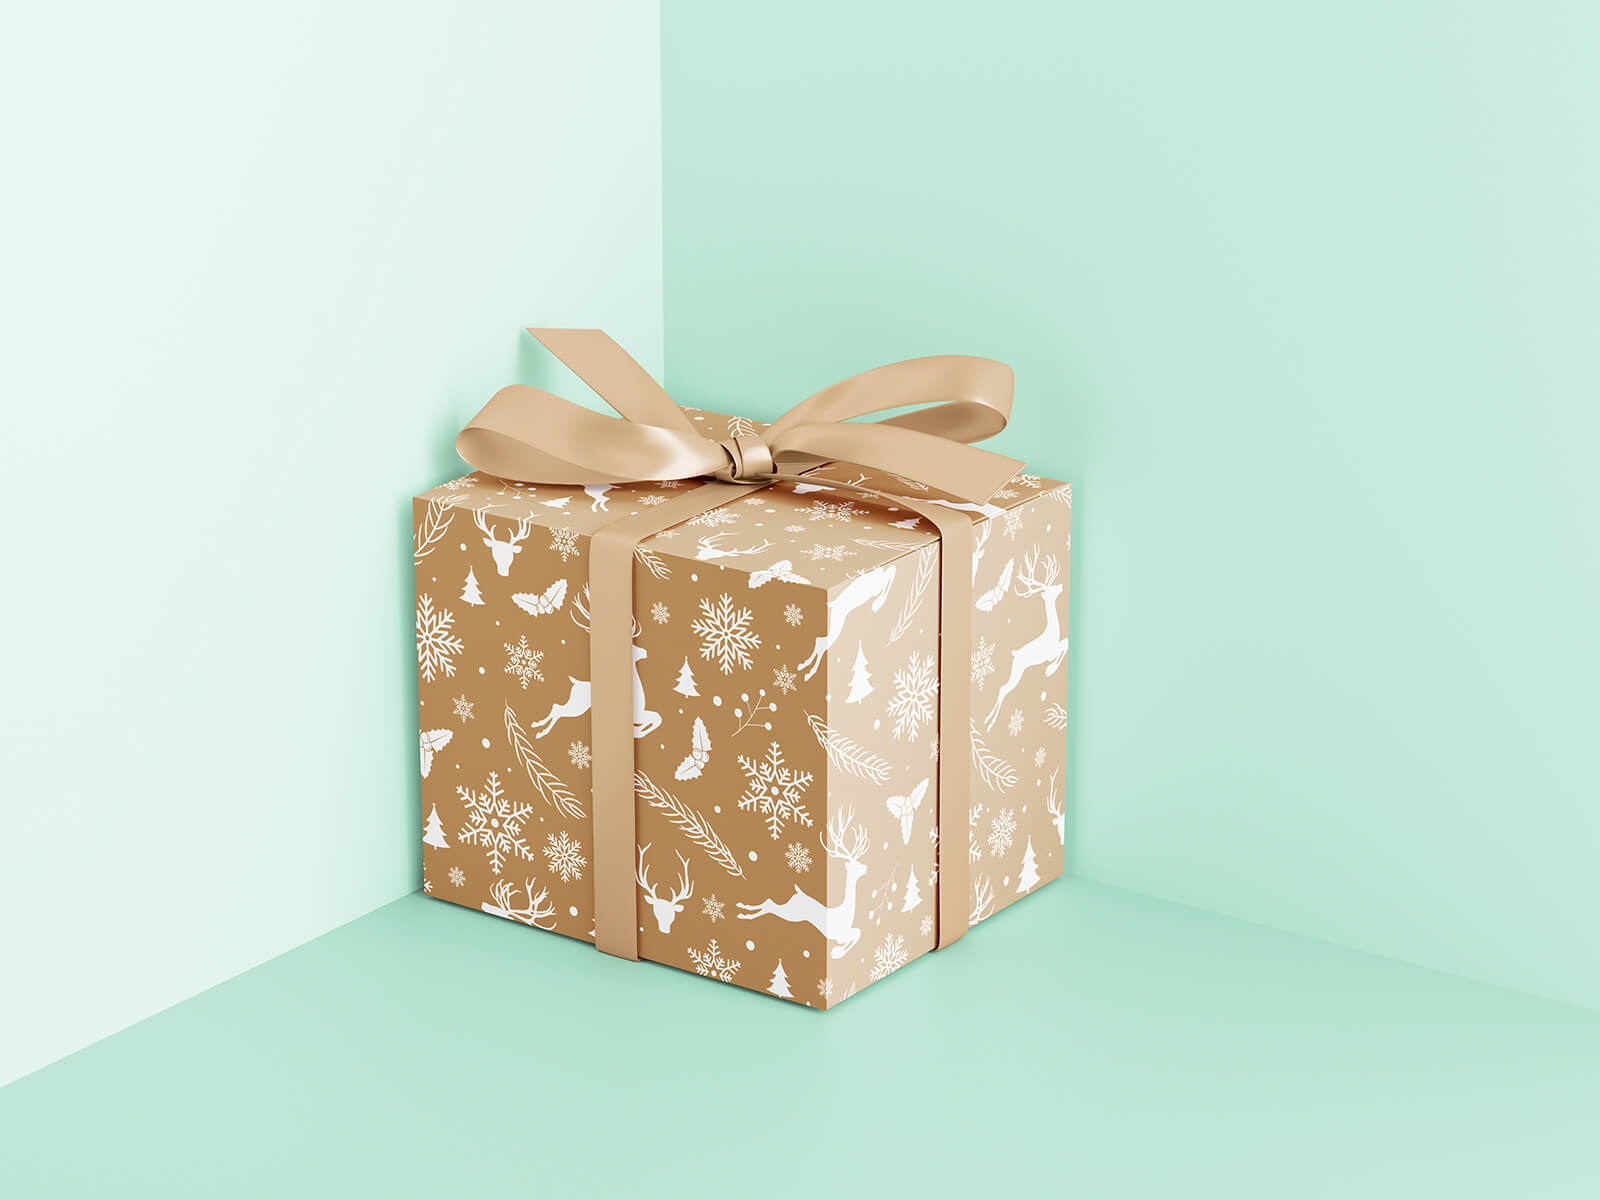 Free Wrapped With Ribbon Square Gift Box Mockup PSD Files